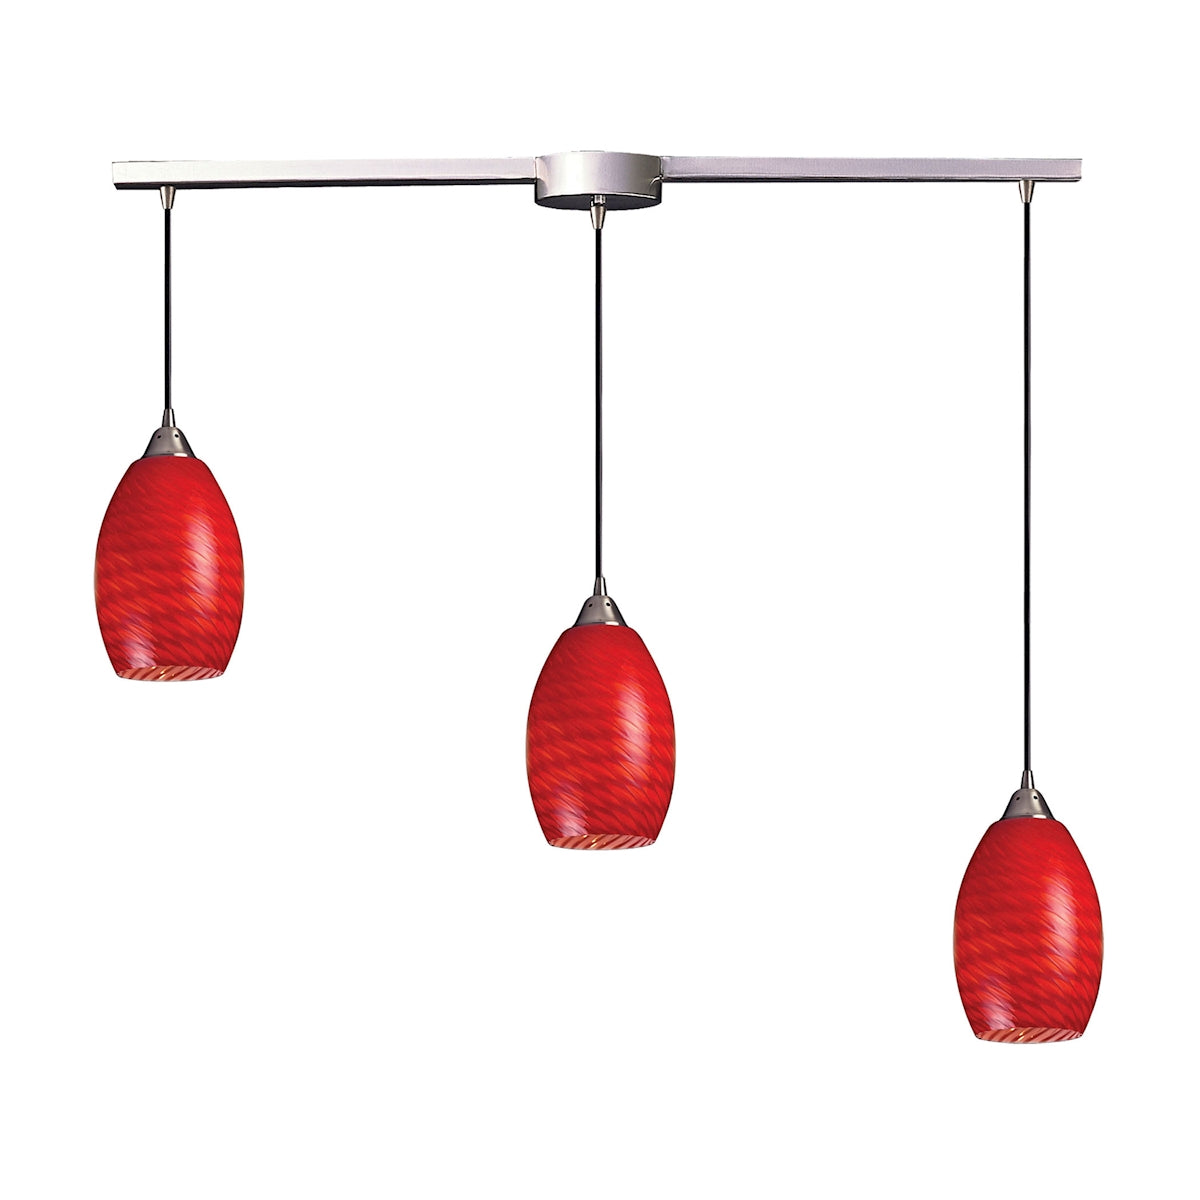 ELK Lighting 517-3L-SC Mulinello 3-Light Linear Pendant Fixture in Satin Nickel with Scarlet Red Glass